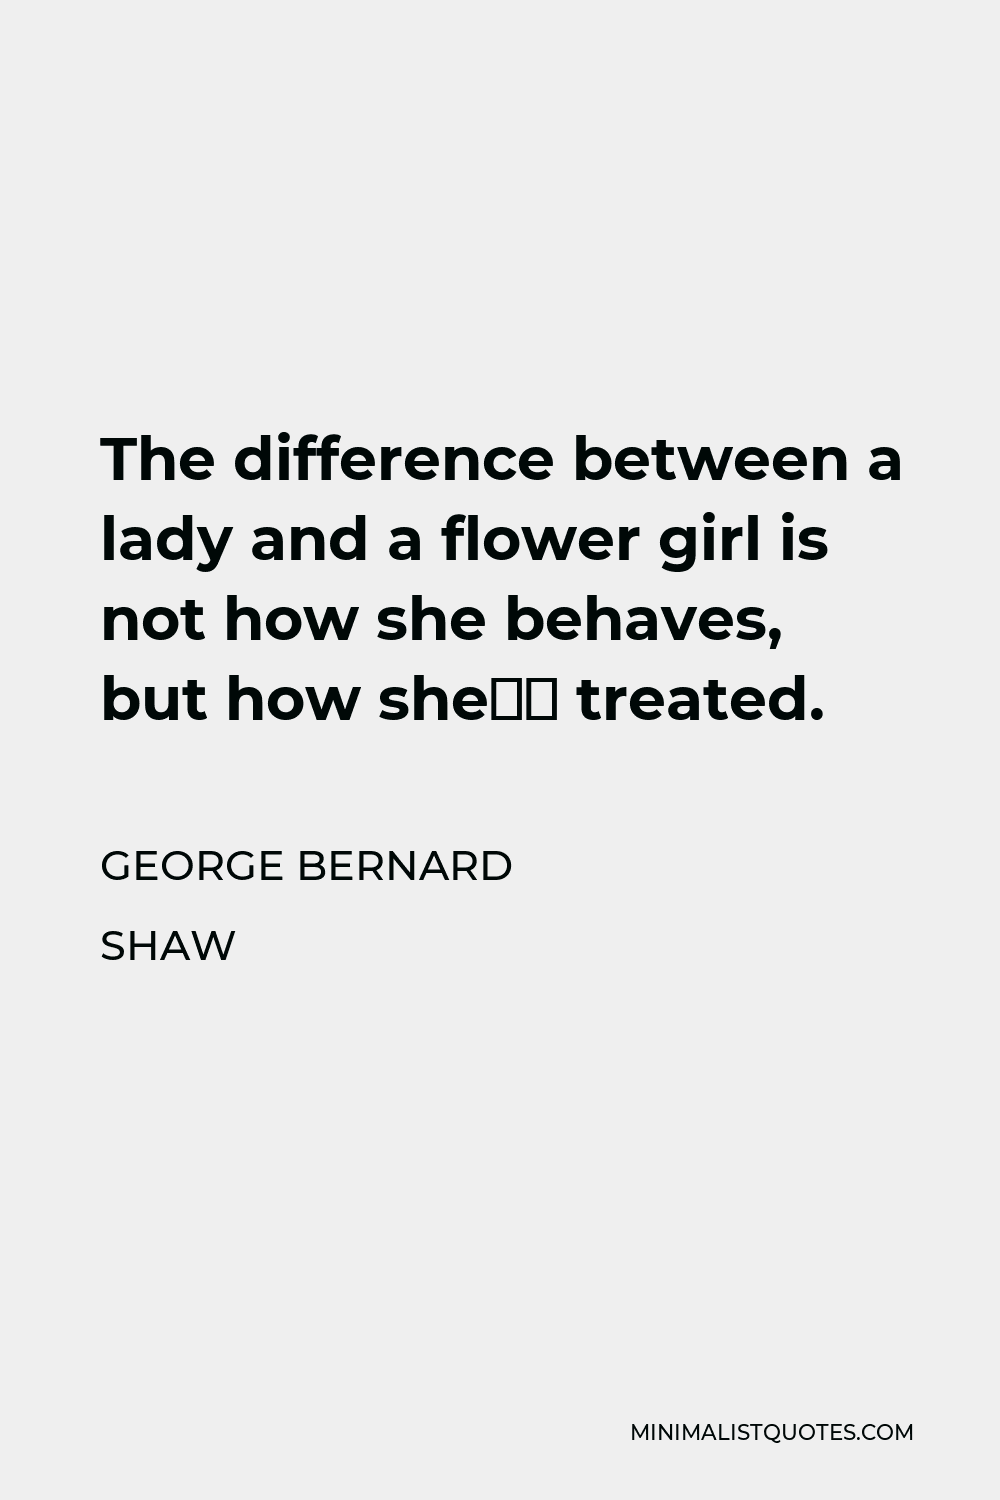 George Bernard Shaw Quote - The difference between a lady and a flower girl is not how she behaves, but how she’s treated.